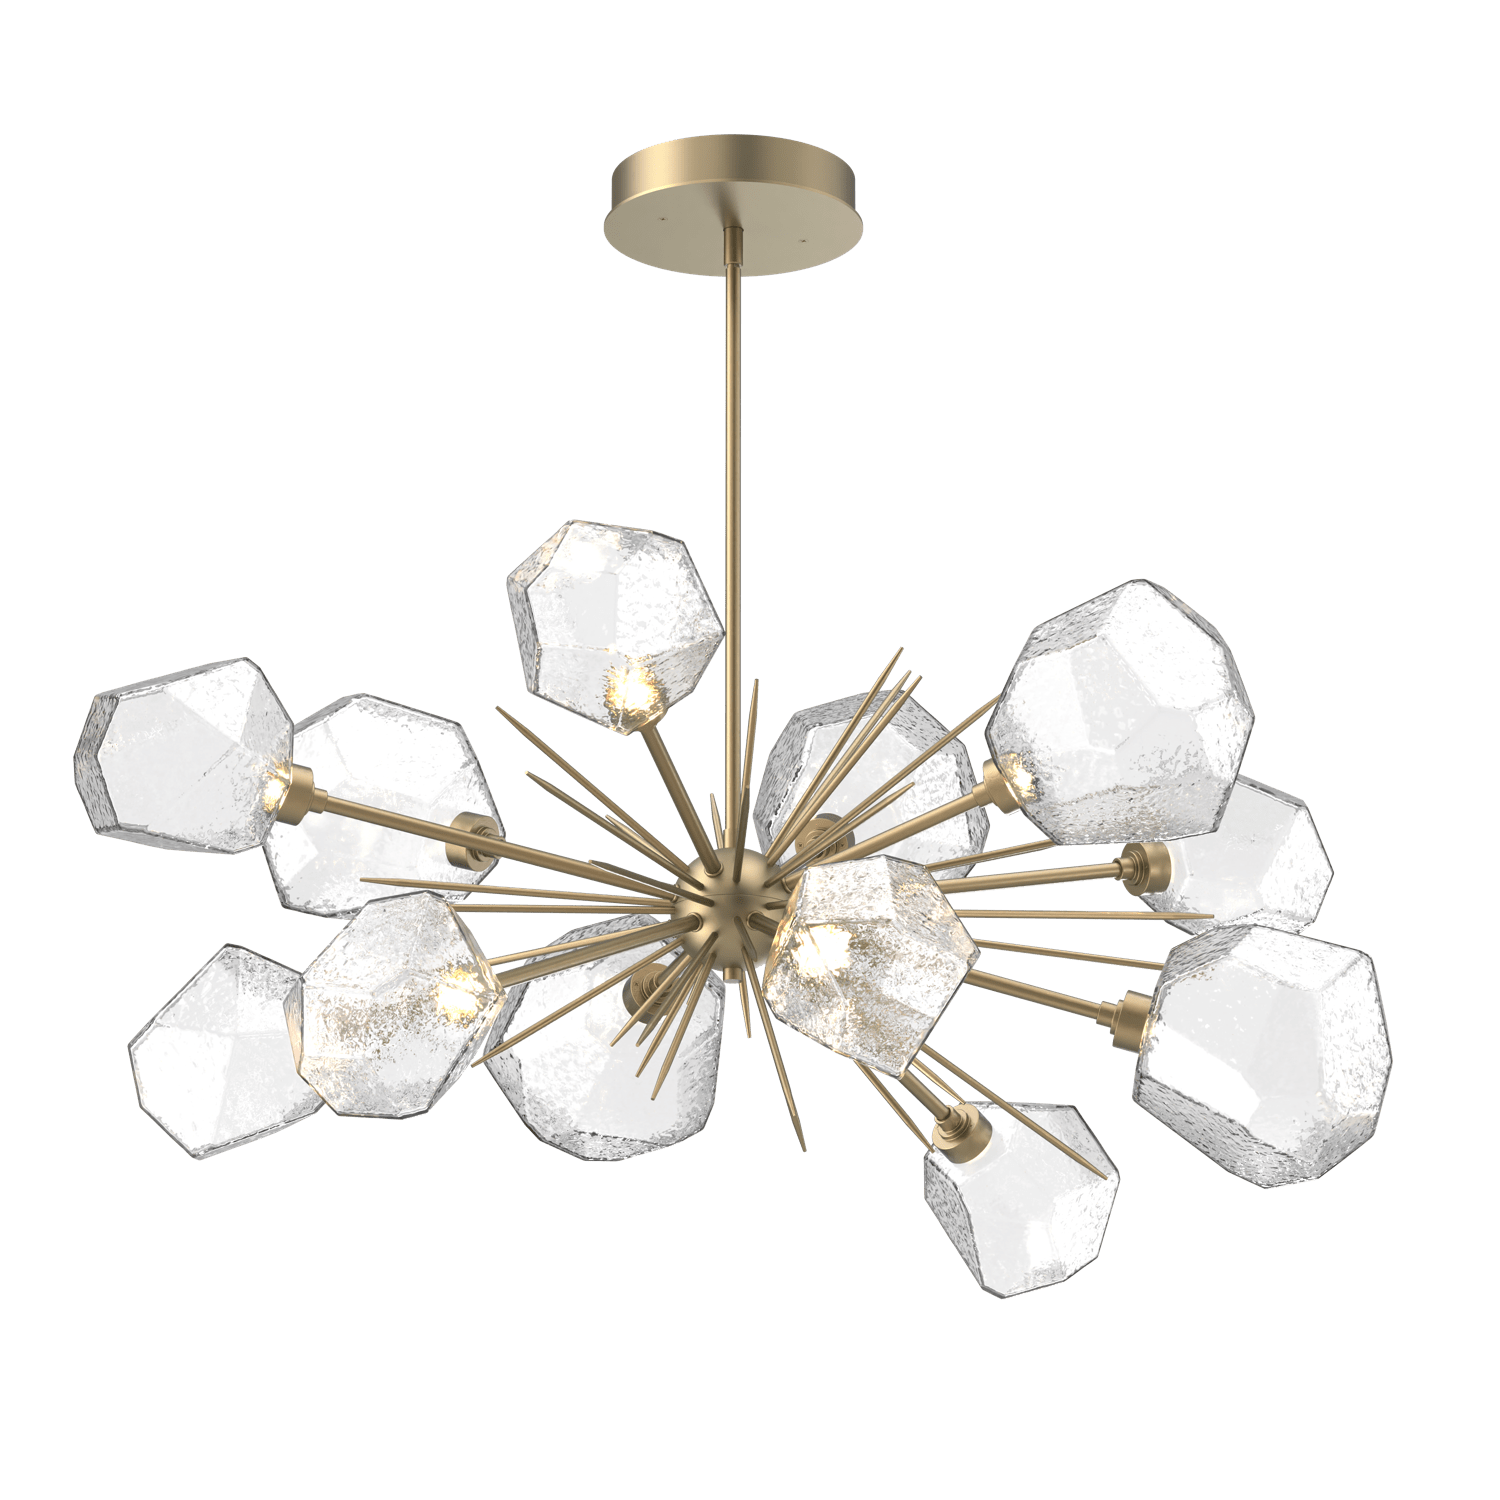 PLB0039-0D-GB-C-Hammerton-Studio-Gem-43-inch-oval-starburst-chandelier-with-gilded-brass-finish-and-clear-blown-glass-shades-and-LED-lamping